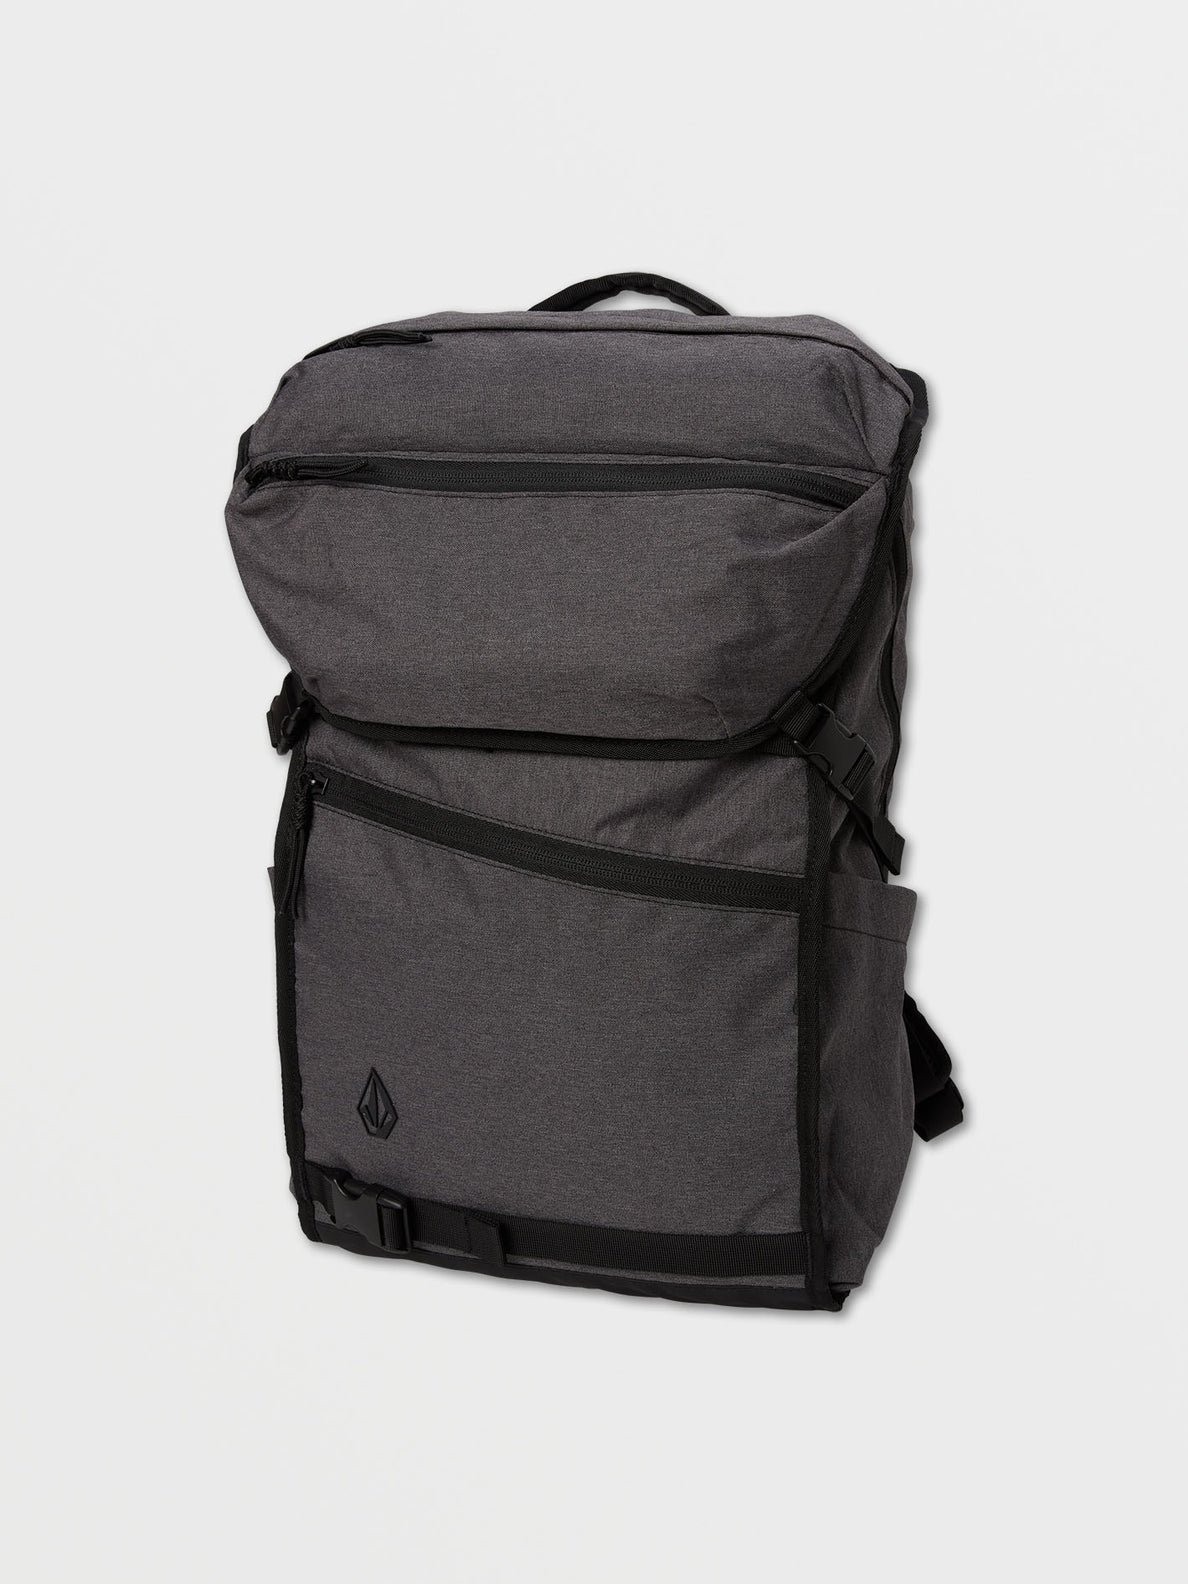 Volcom Substrate Backpack - CHARCOAL HEATHER (D6532107_CHH) [F]